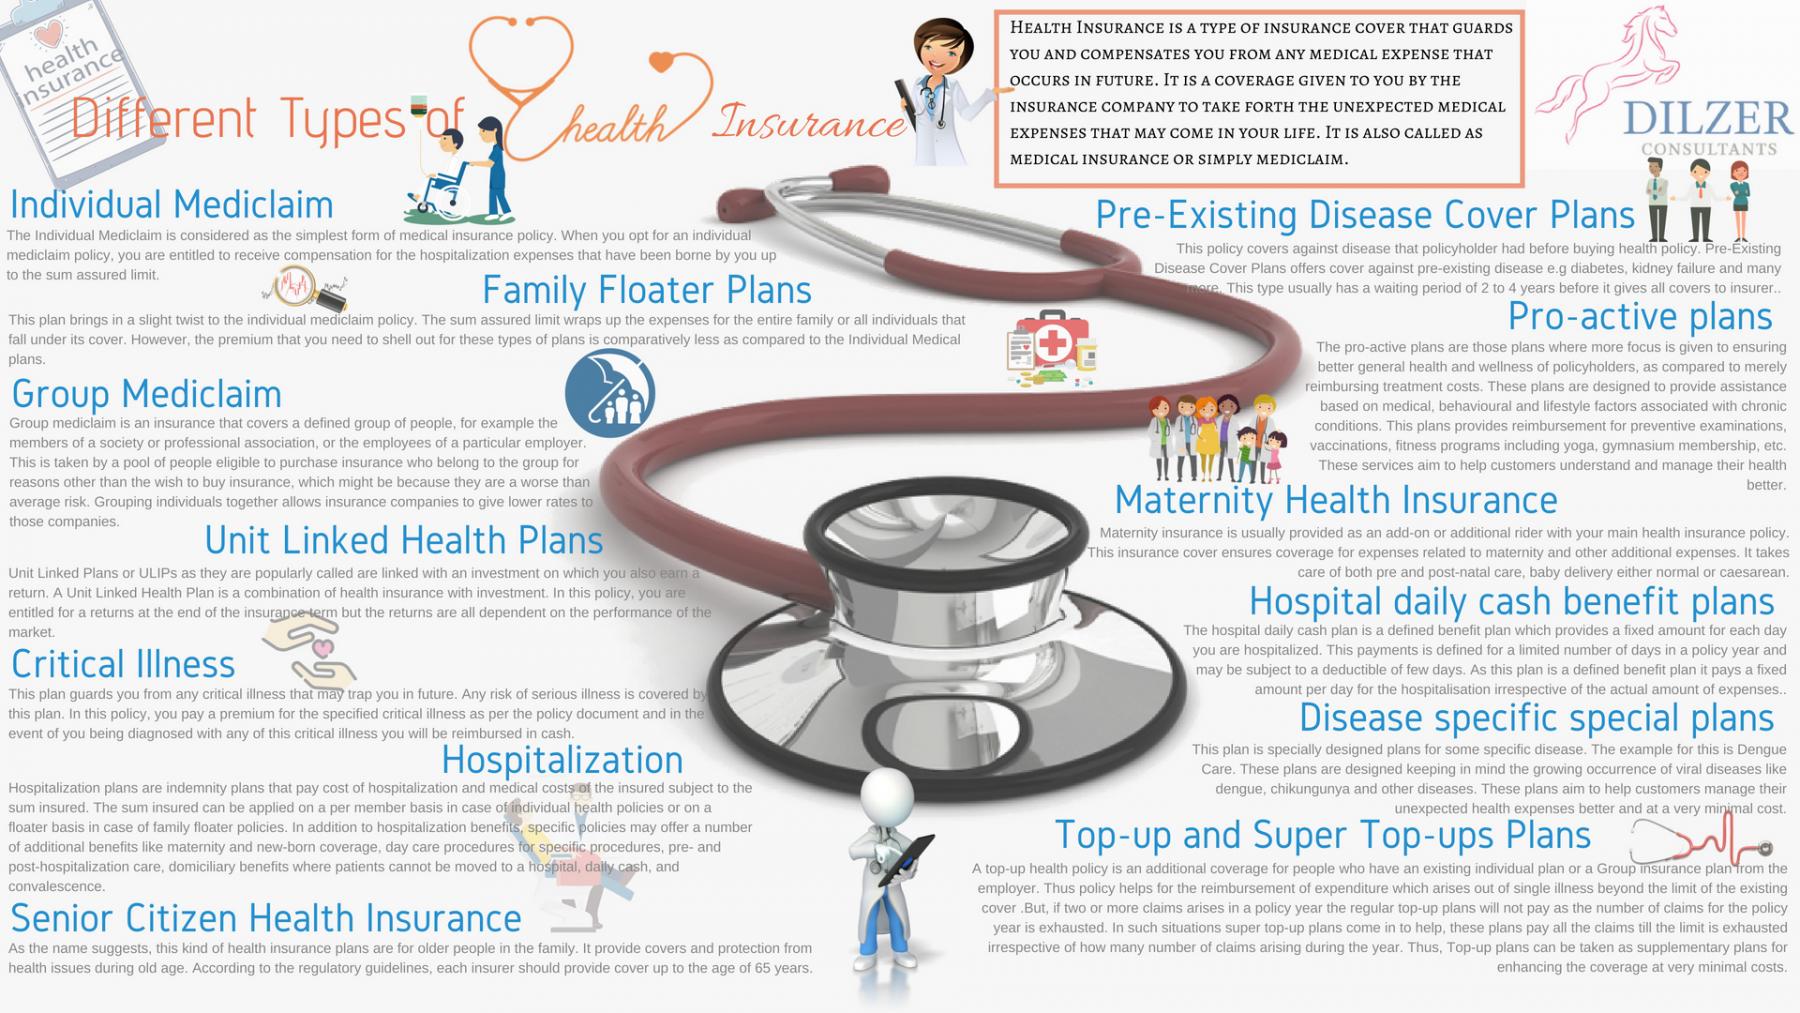 Different types of health insurance 